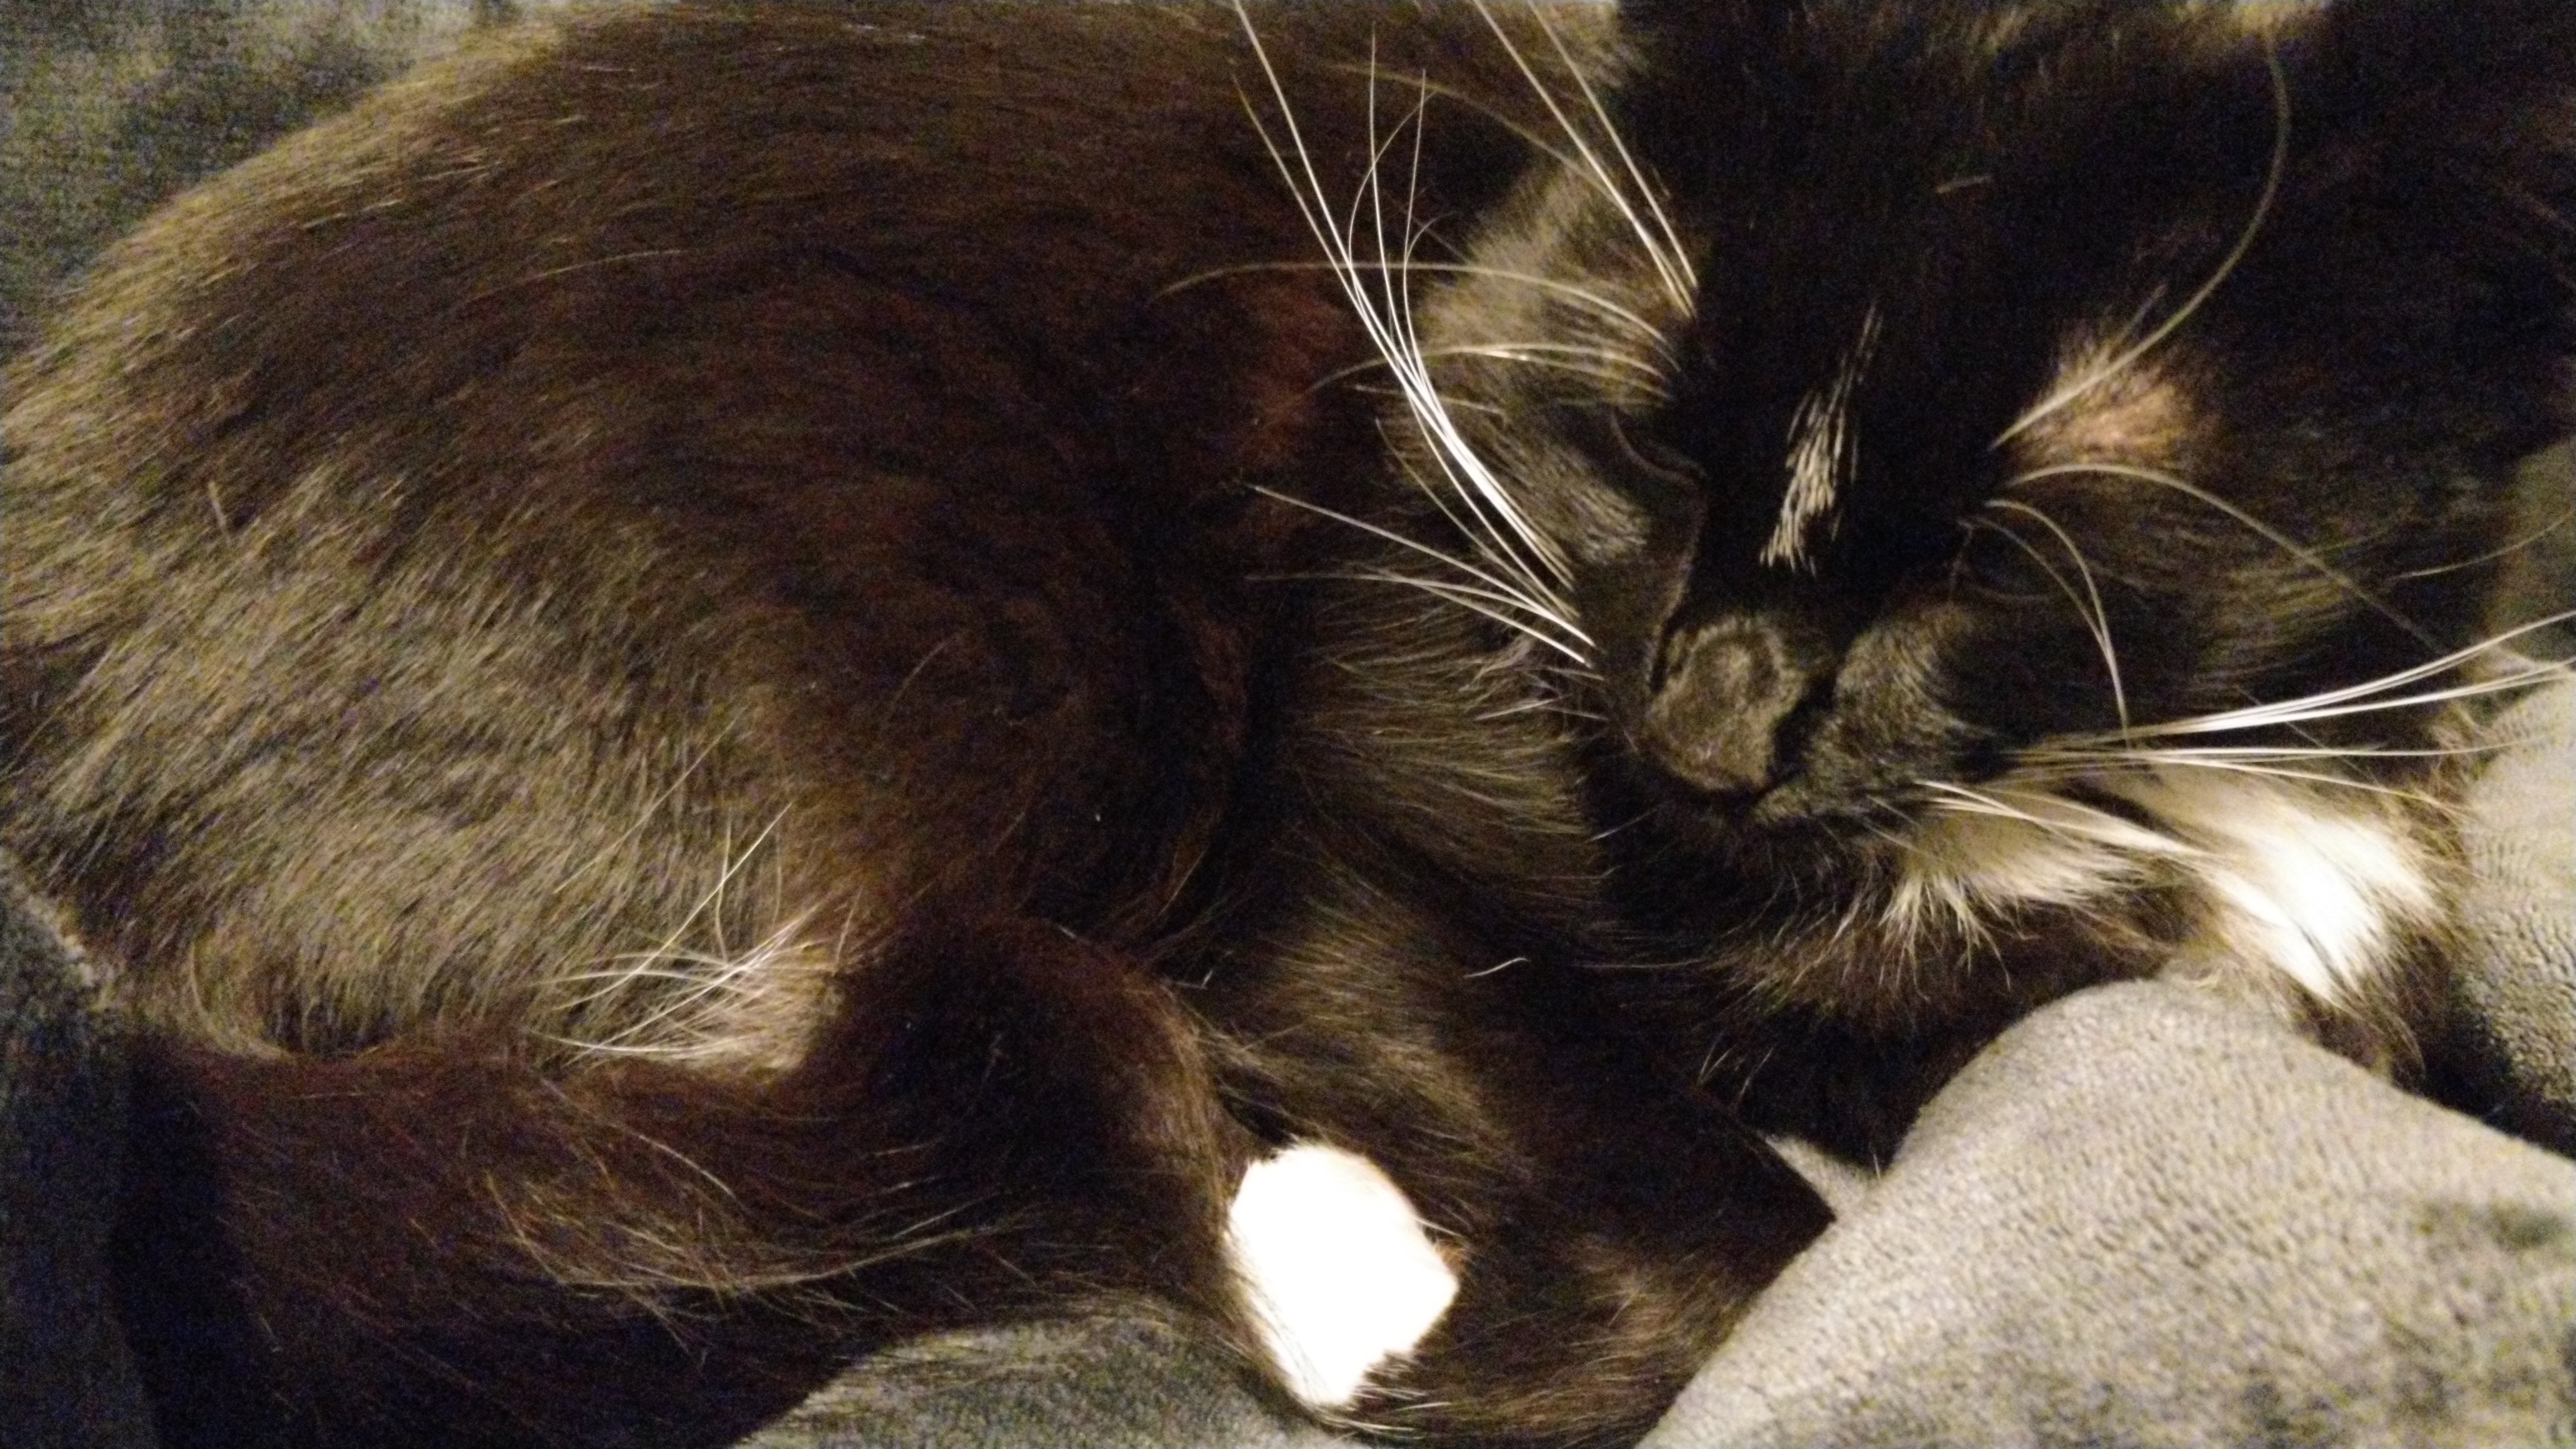 curled up tuxedo cat on lap with one white paw showing very clearly